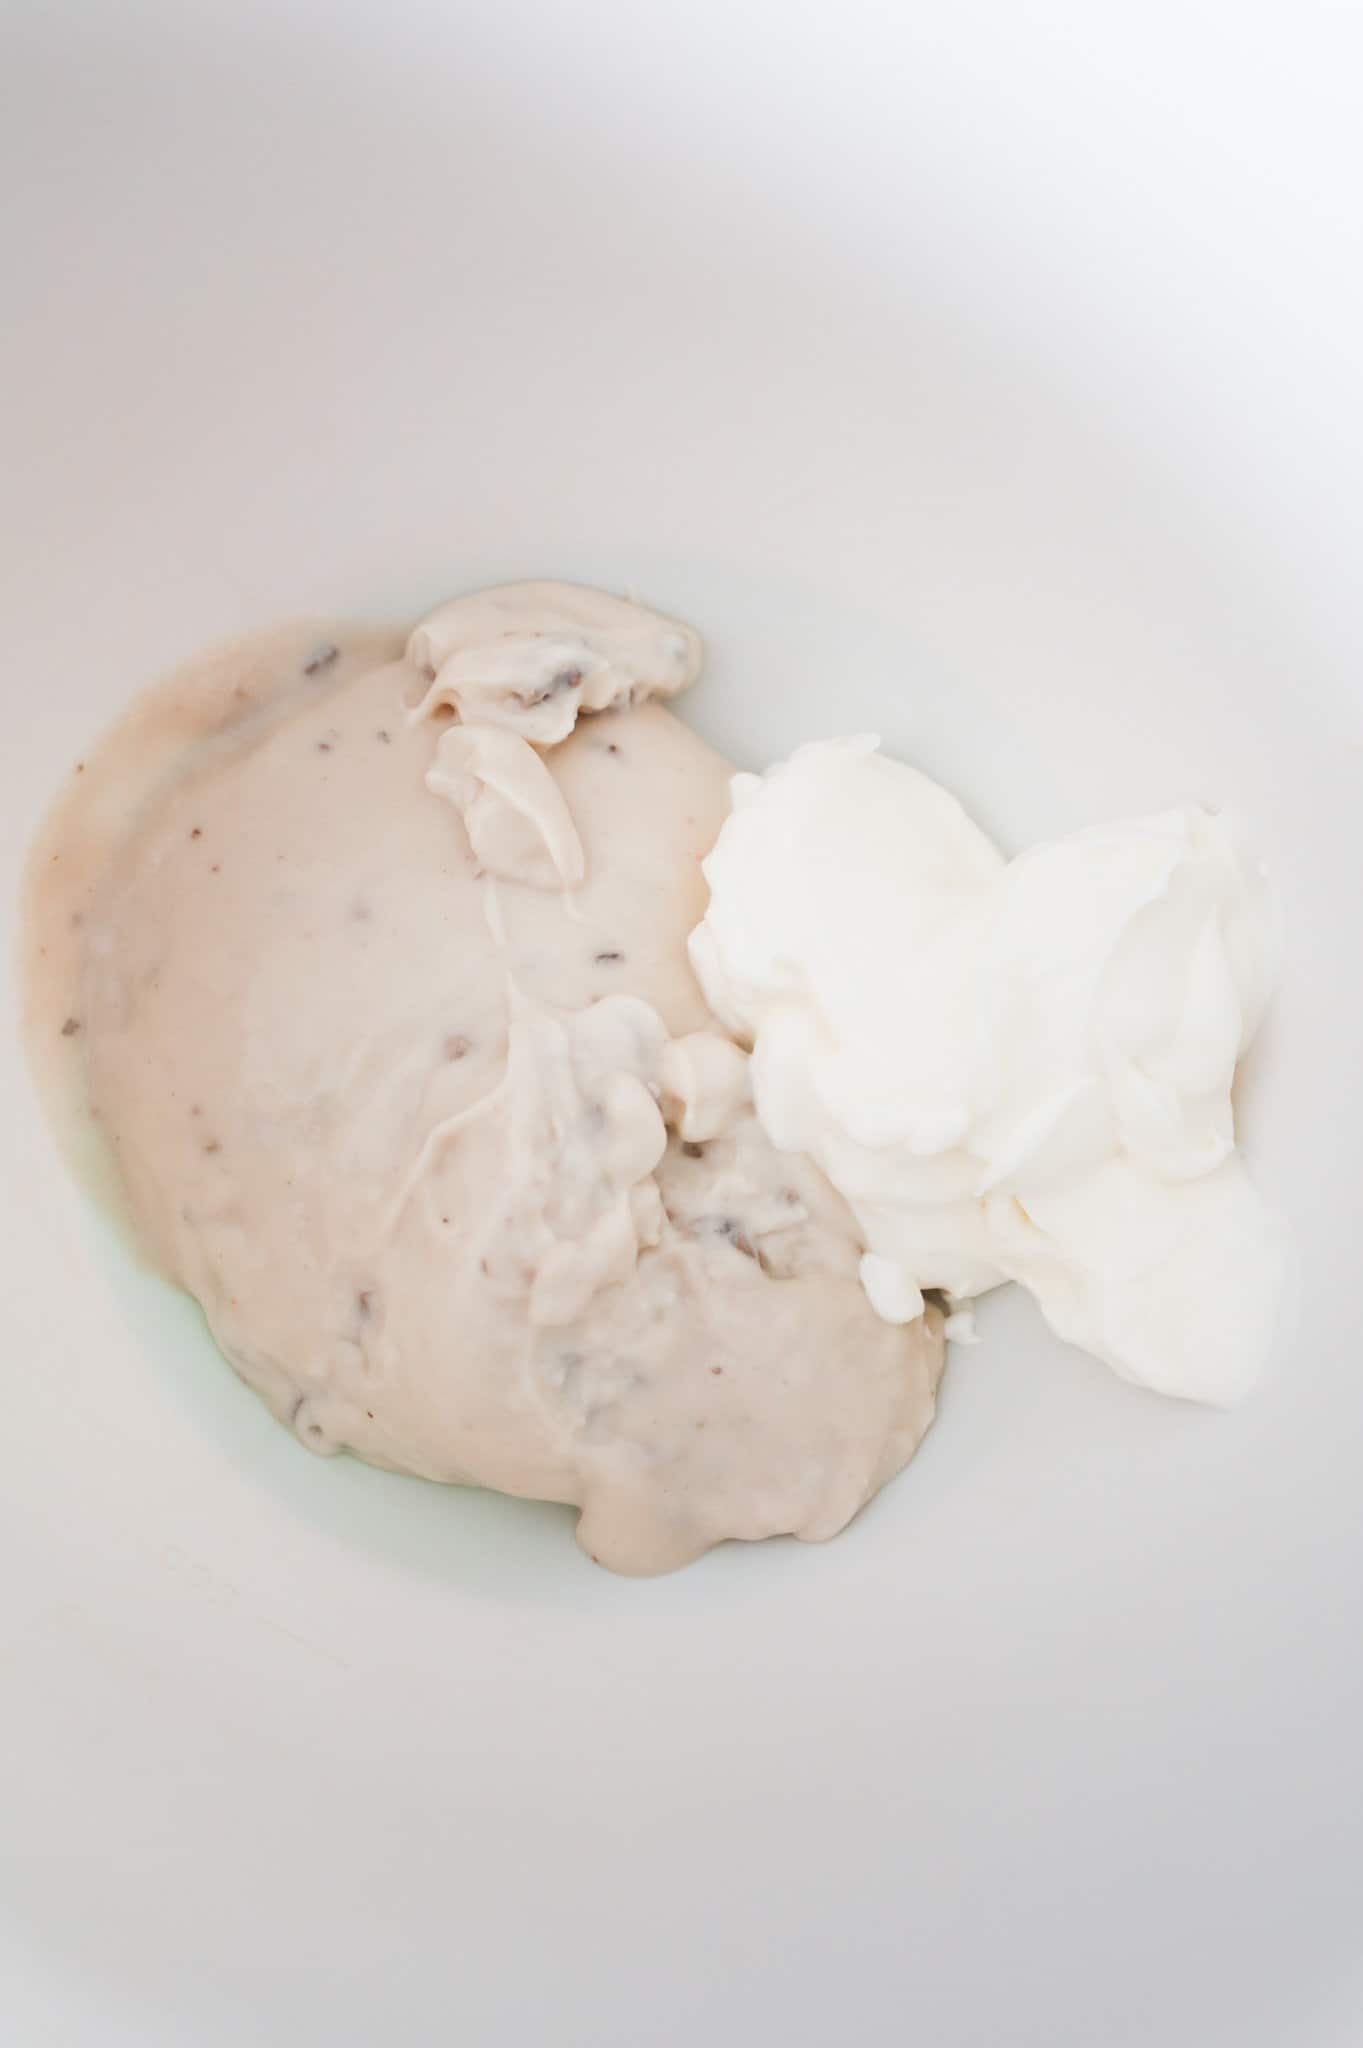 sour cream and cream of mushroom soup in a mixing bowl